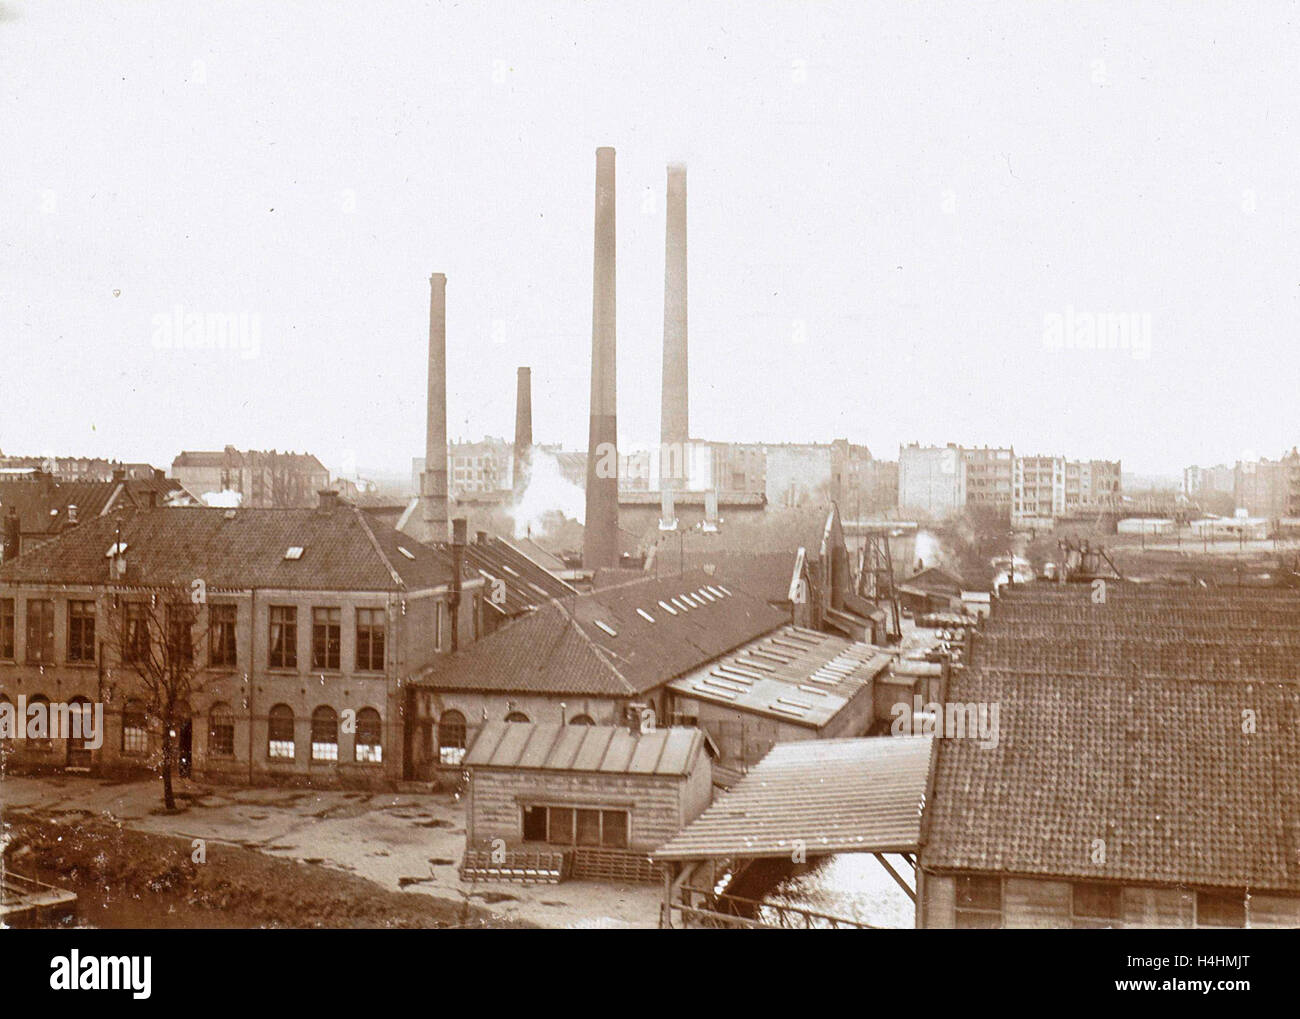 Exterior of factory buildings with chimneys, Anonymous Stock Photo